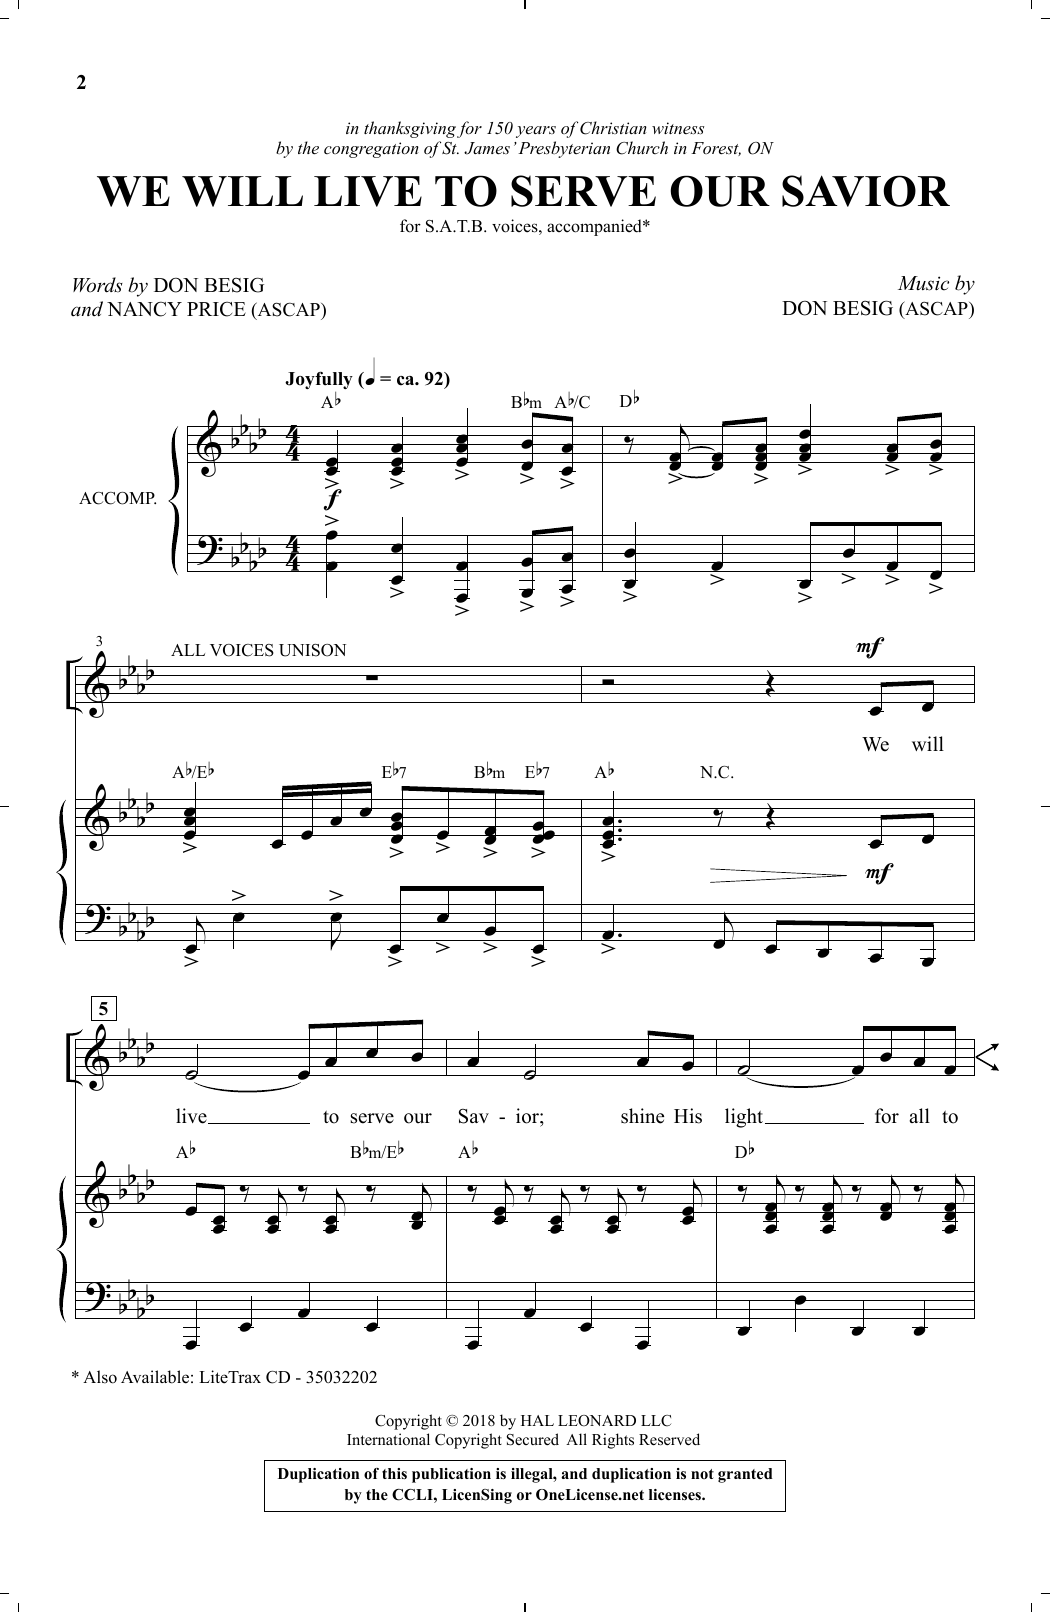 Download Don Besig & Nancy Price We Will Live To Serve Our Savior Sheet Music